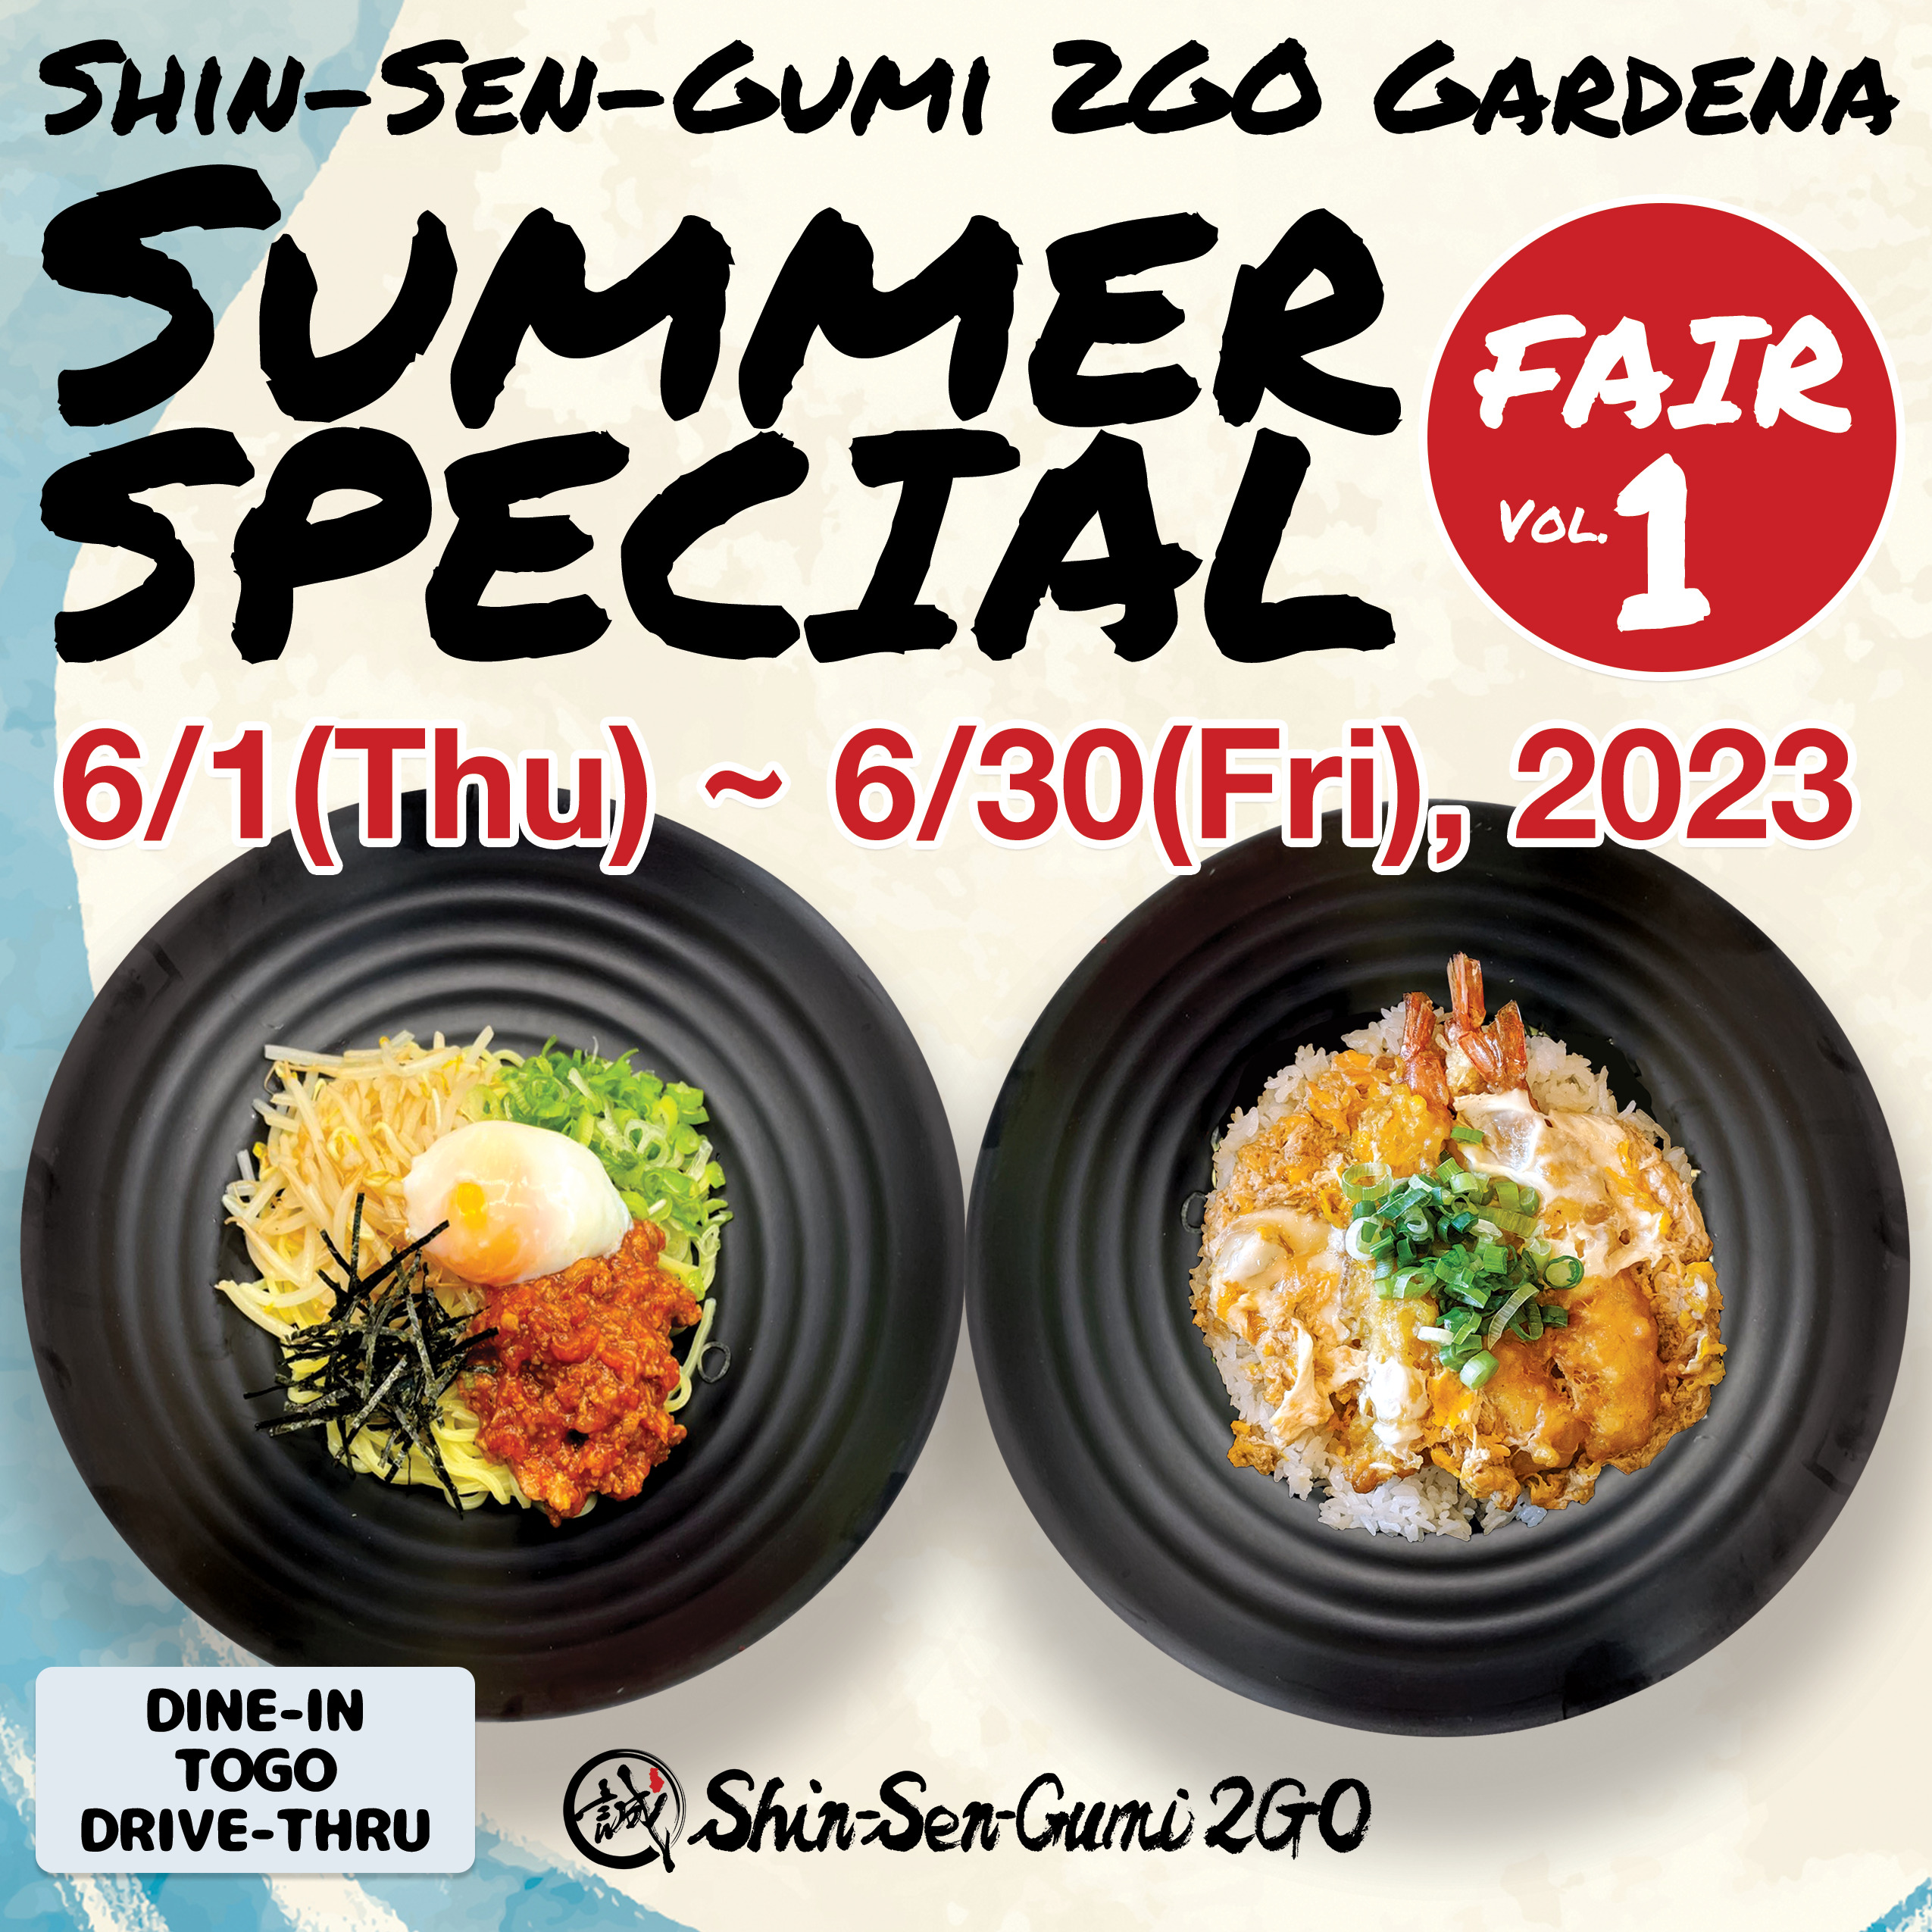 A background image that looks like a watercolor painting with the image of water on unbleached Japanese paper. At the top is "SHIN -SEN-GUMI 2GO SUMMER SPECIAL" in strong handwritten font, with Fair Vol.1 in white letters inside a red circle. Underneath it is written in red Gothic letters, "6/1 (Thu) ~ 6/30 (Fri), 2023." There are two black rice bowls in the center, with spicy cold noodles on the right and shrimp tempura on the left. At the bottom is the Shin-Sen-Gumi 2GO logo in the center, with DINE-IN TOGO DRIVE-THRU on the left.